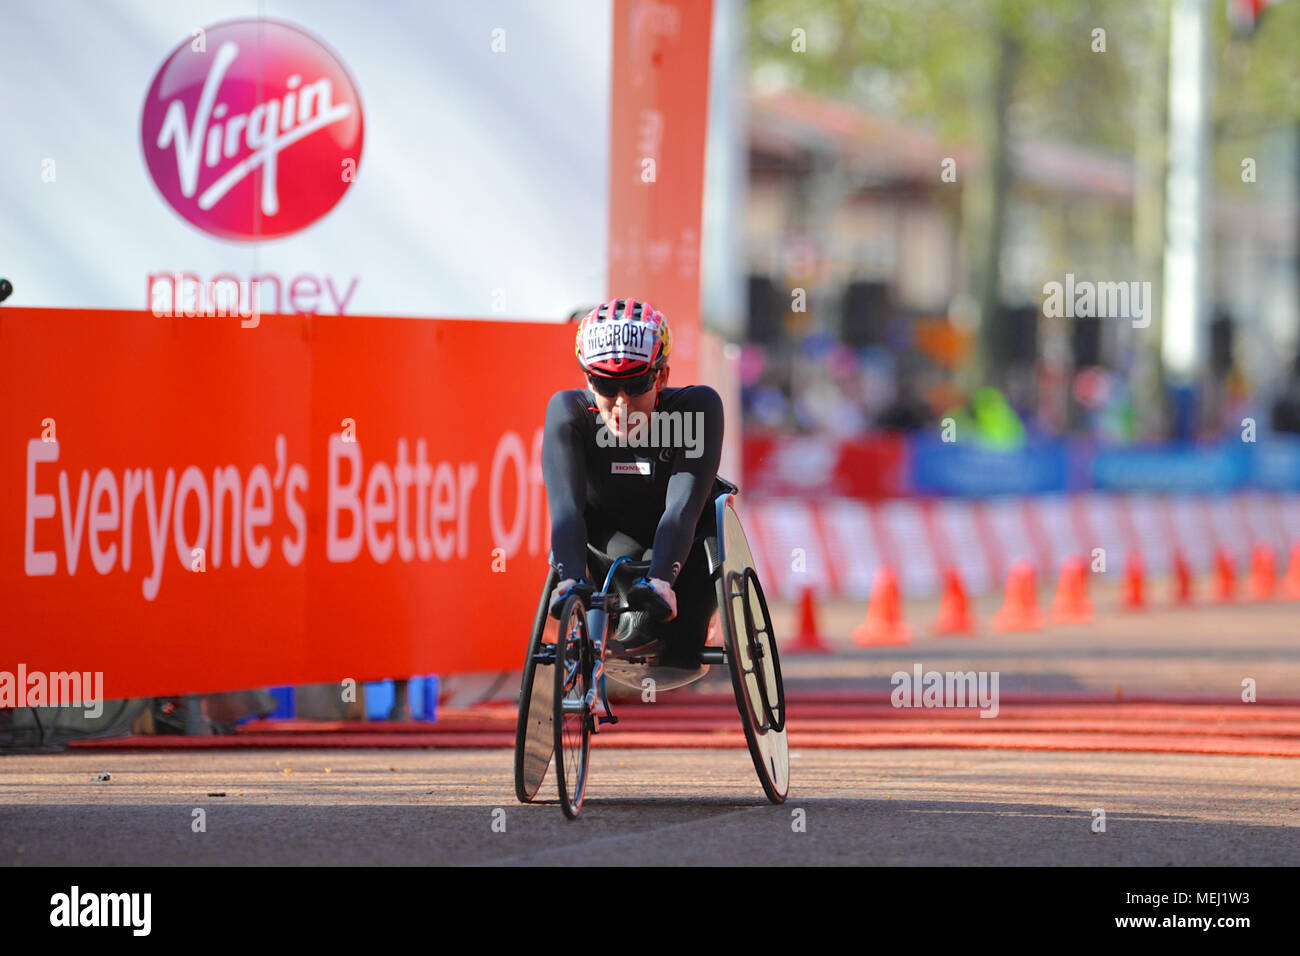 London, UK. 22nd Apr, 2018. Amanda McGrory (USA) crossing the finish line on The Mall during the Virgin Money London Marathon Women’s Wheelchair race, The Mall, London, United Kingdom.  McGrory finished in 5th place with a time of 1:43:04. Credit: Michael Preston/Alamy Live News Stock Photo